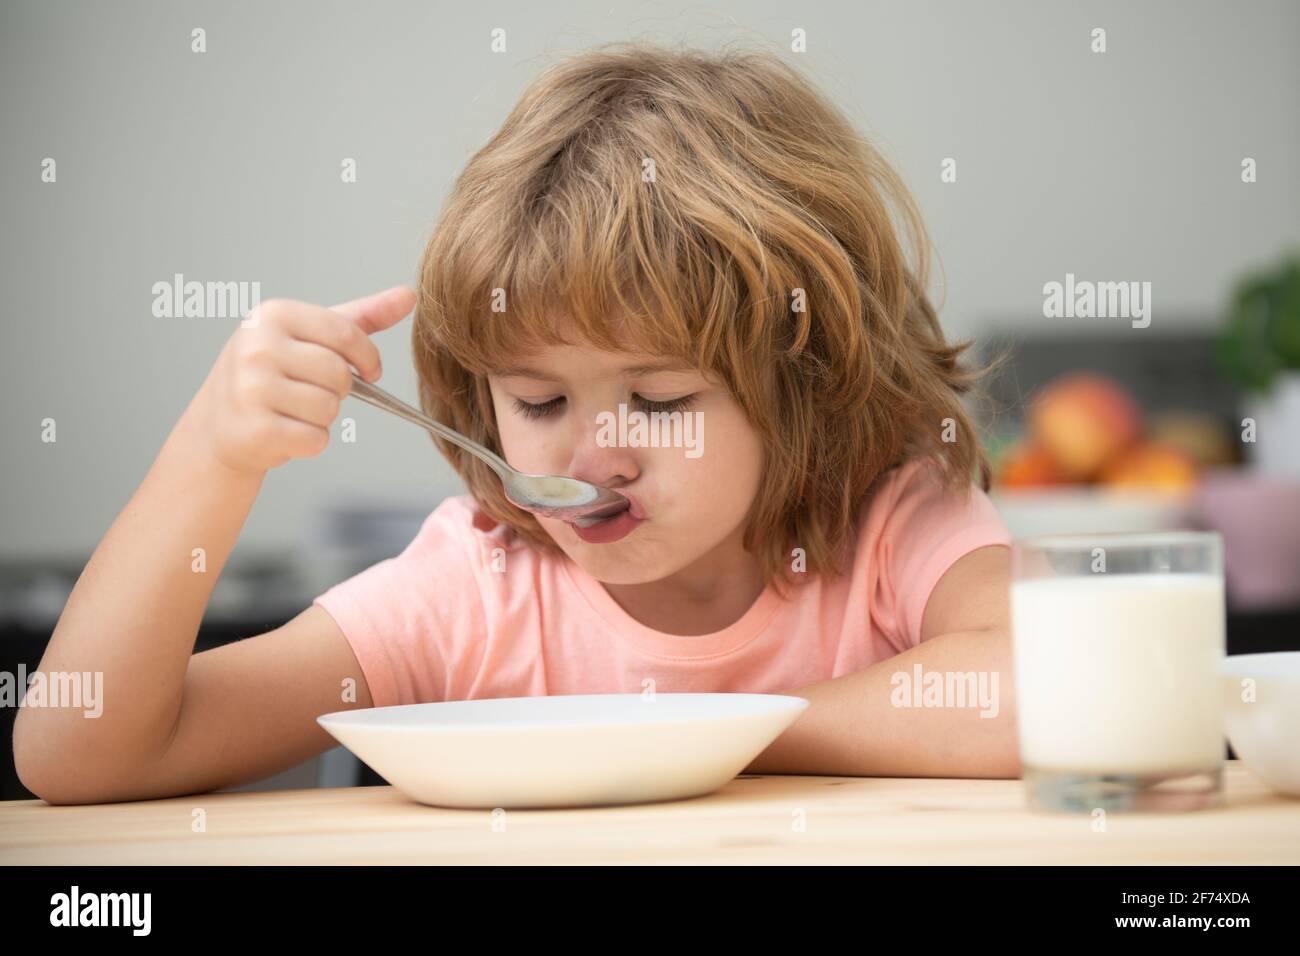 Child eating healthy food. Cute little boy having soup for lunch. Stock Photo